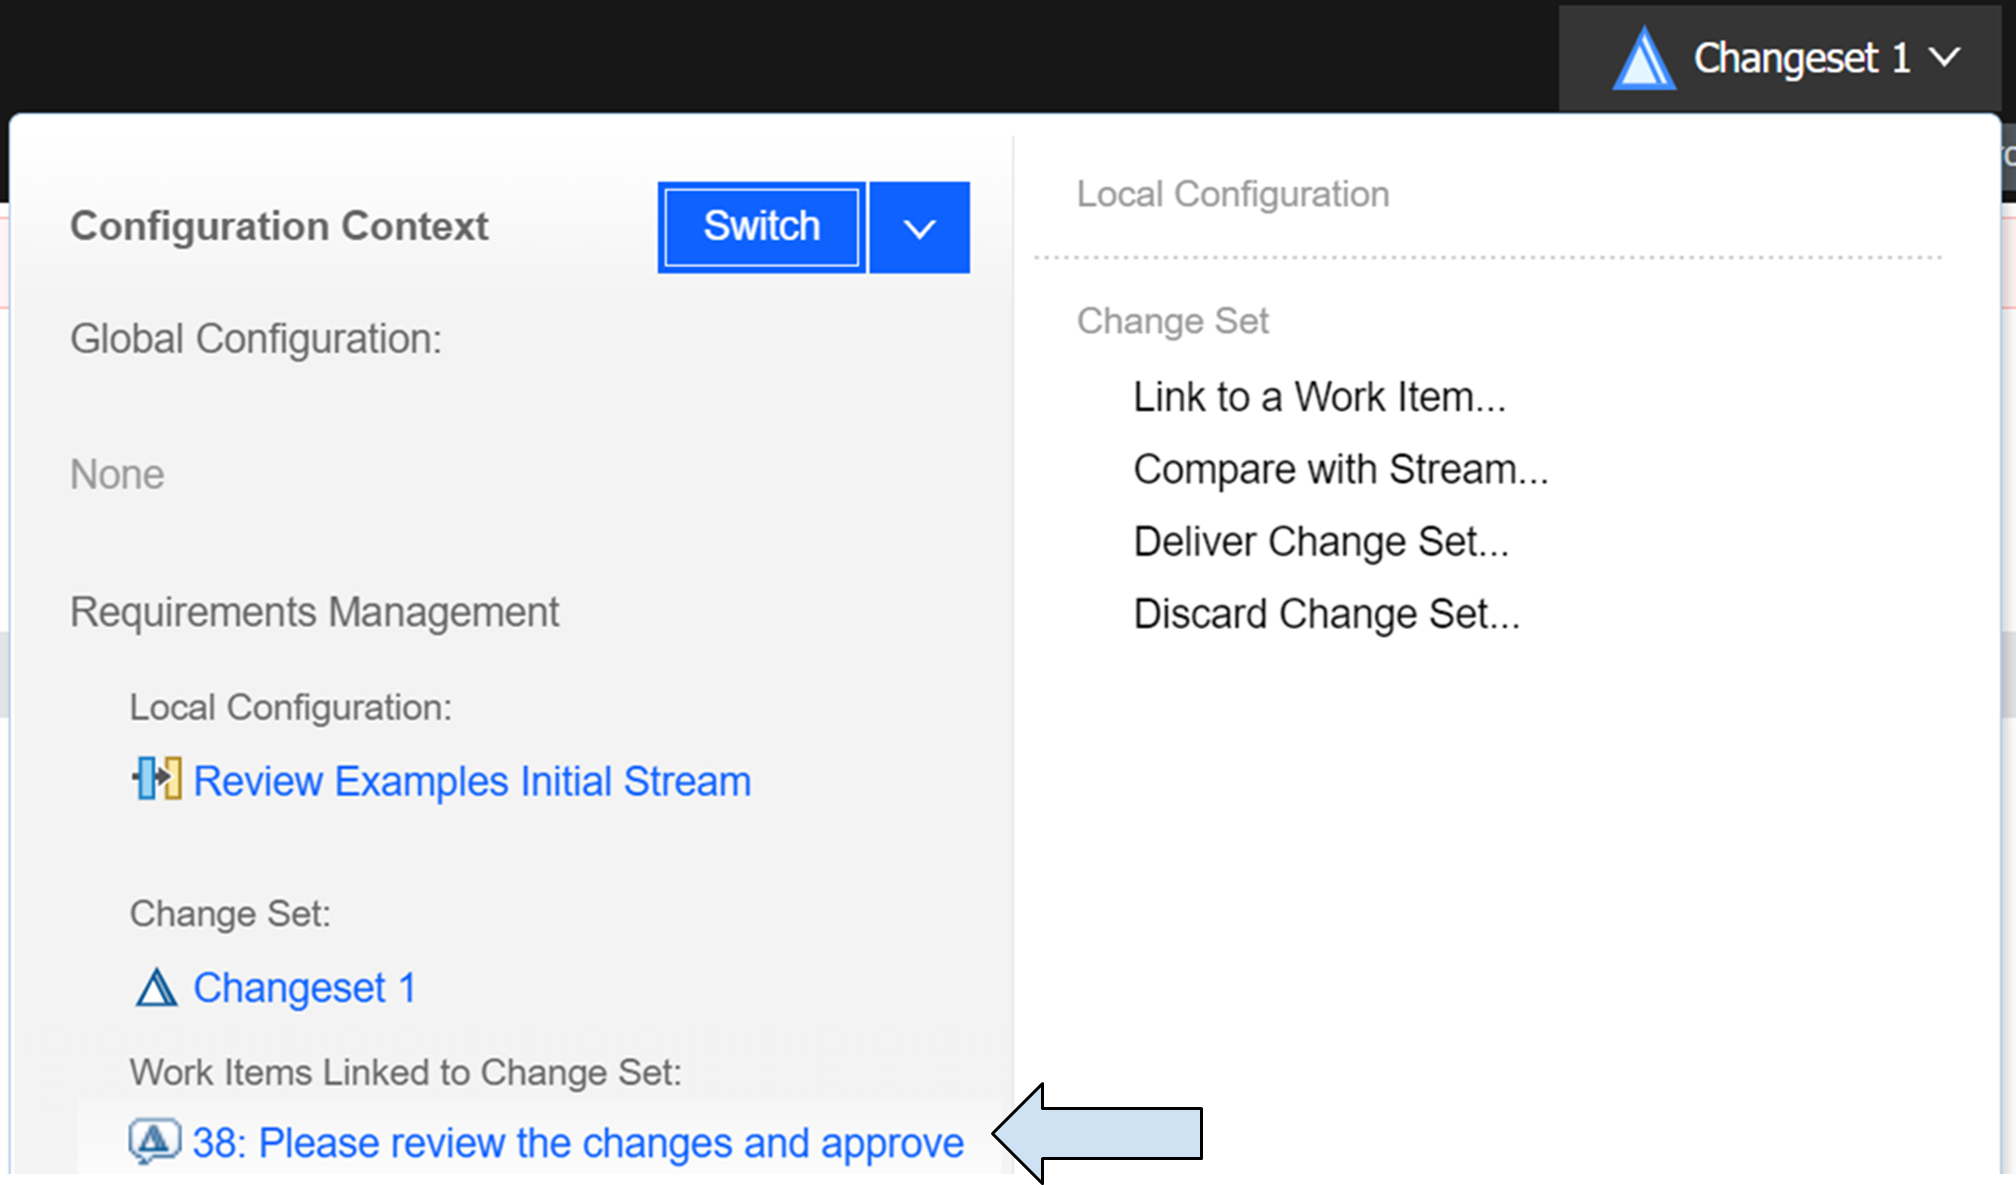 New category under local configuration and change sets - Work Items linked to Change Set